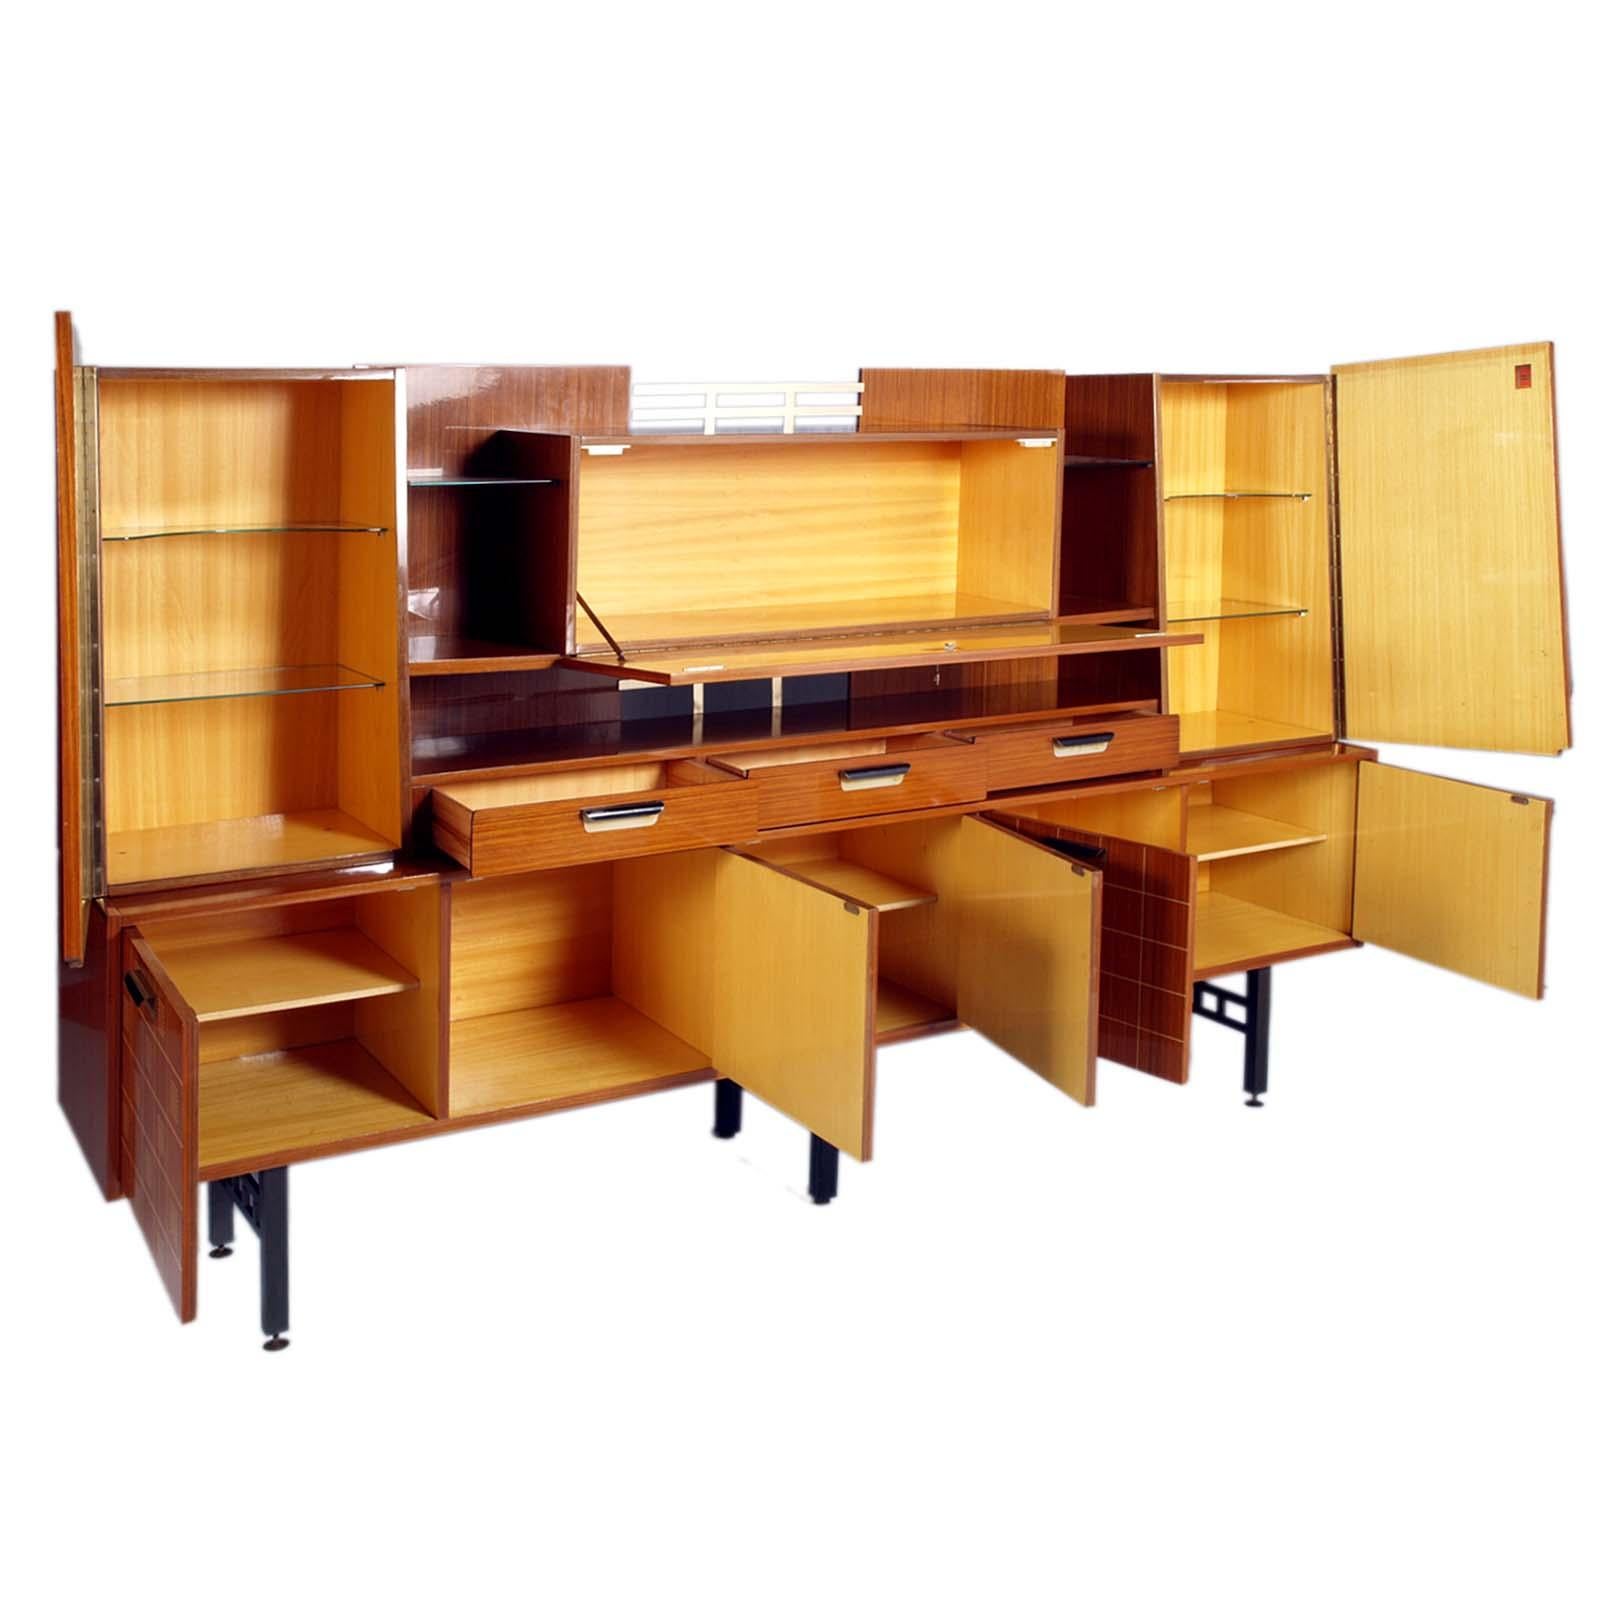 Large characteristic Mid century Modern sideboard cabinet of Italian design by La Permanente Mobili Cantu with central flap, in rosewood veneer, glass shelves, with inlay decorations on the doors and metal legs. Interior veneered with maple

La